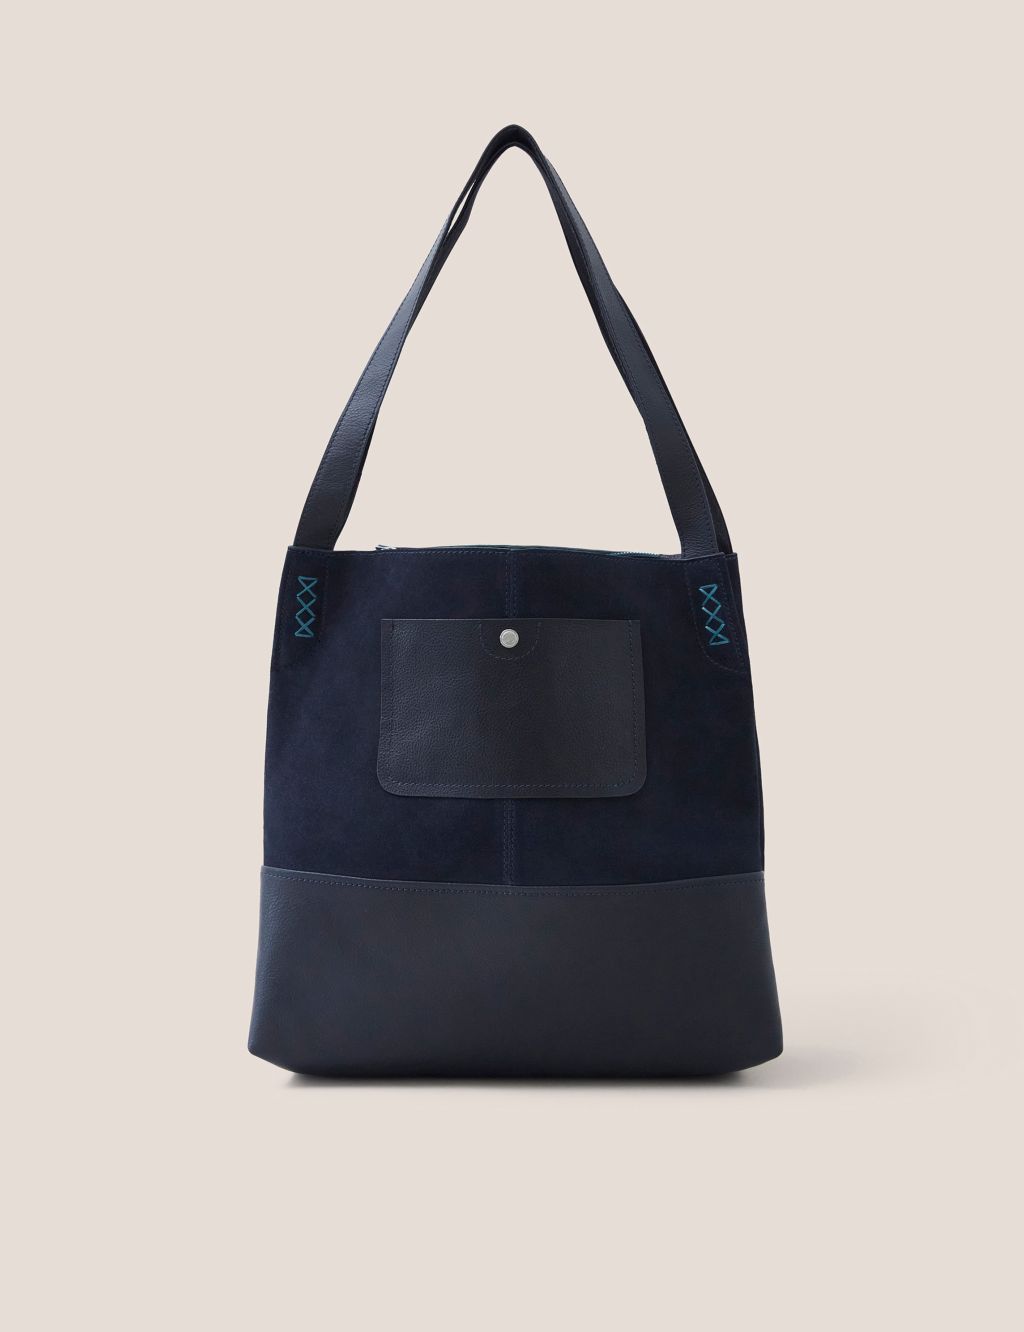 Leather Tote Bag image 1